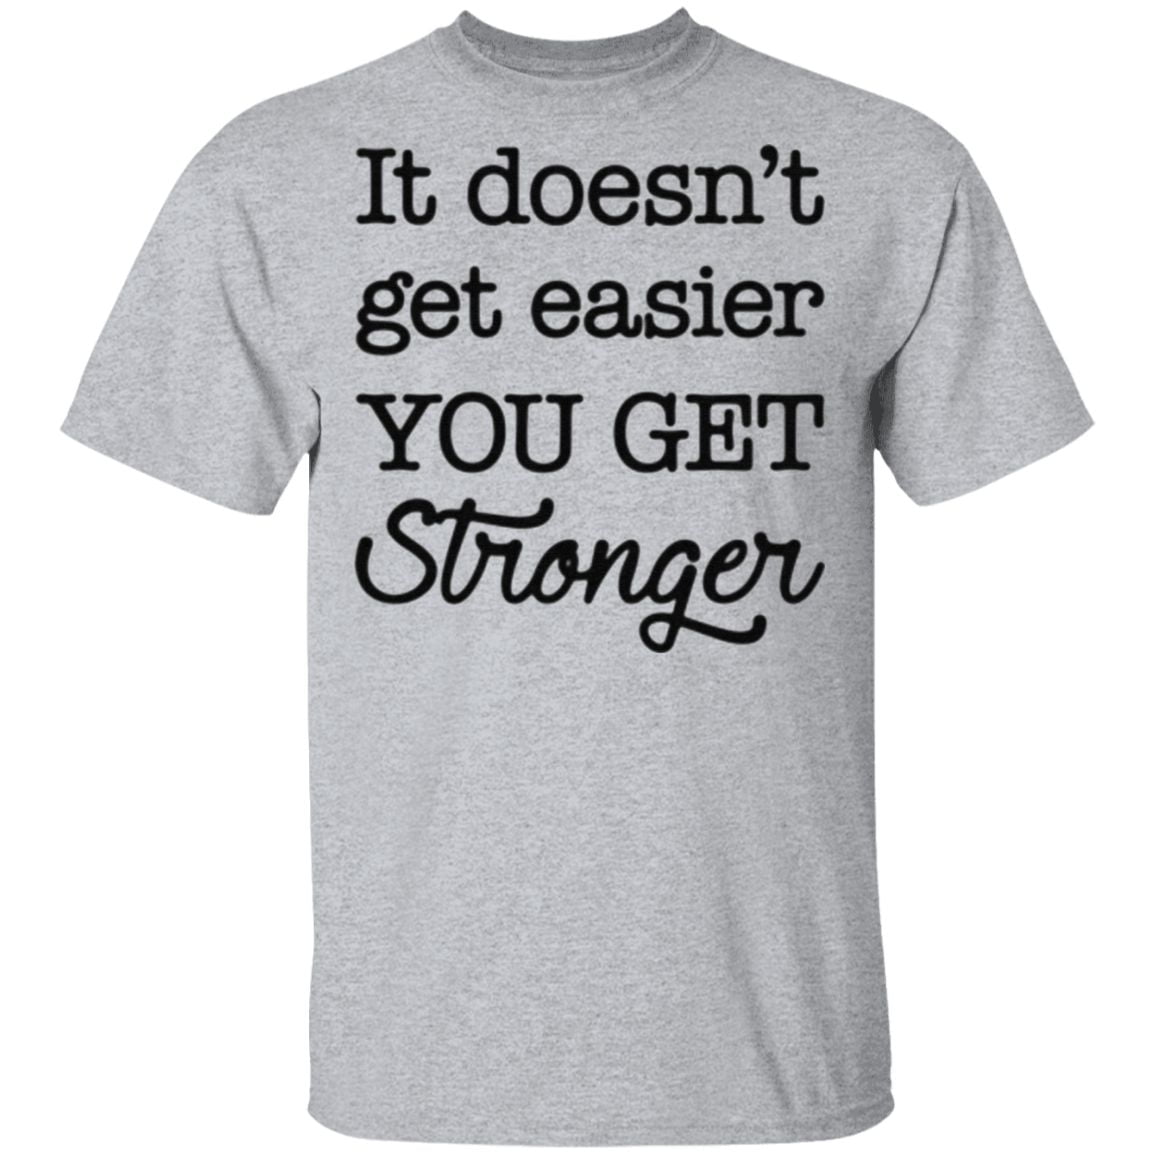 It’s doesn’t get easier you get stronger t shirt